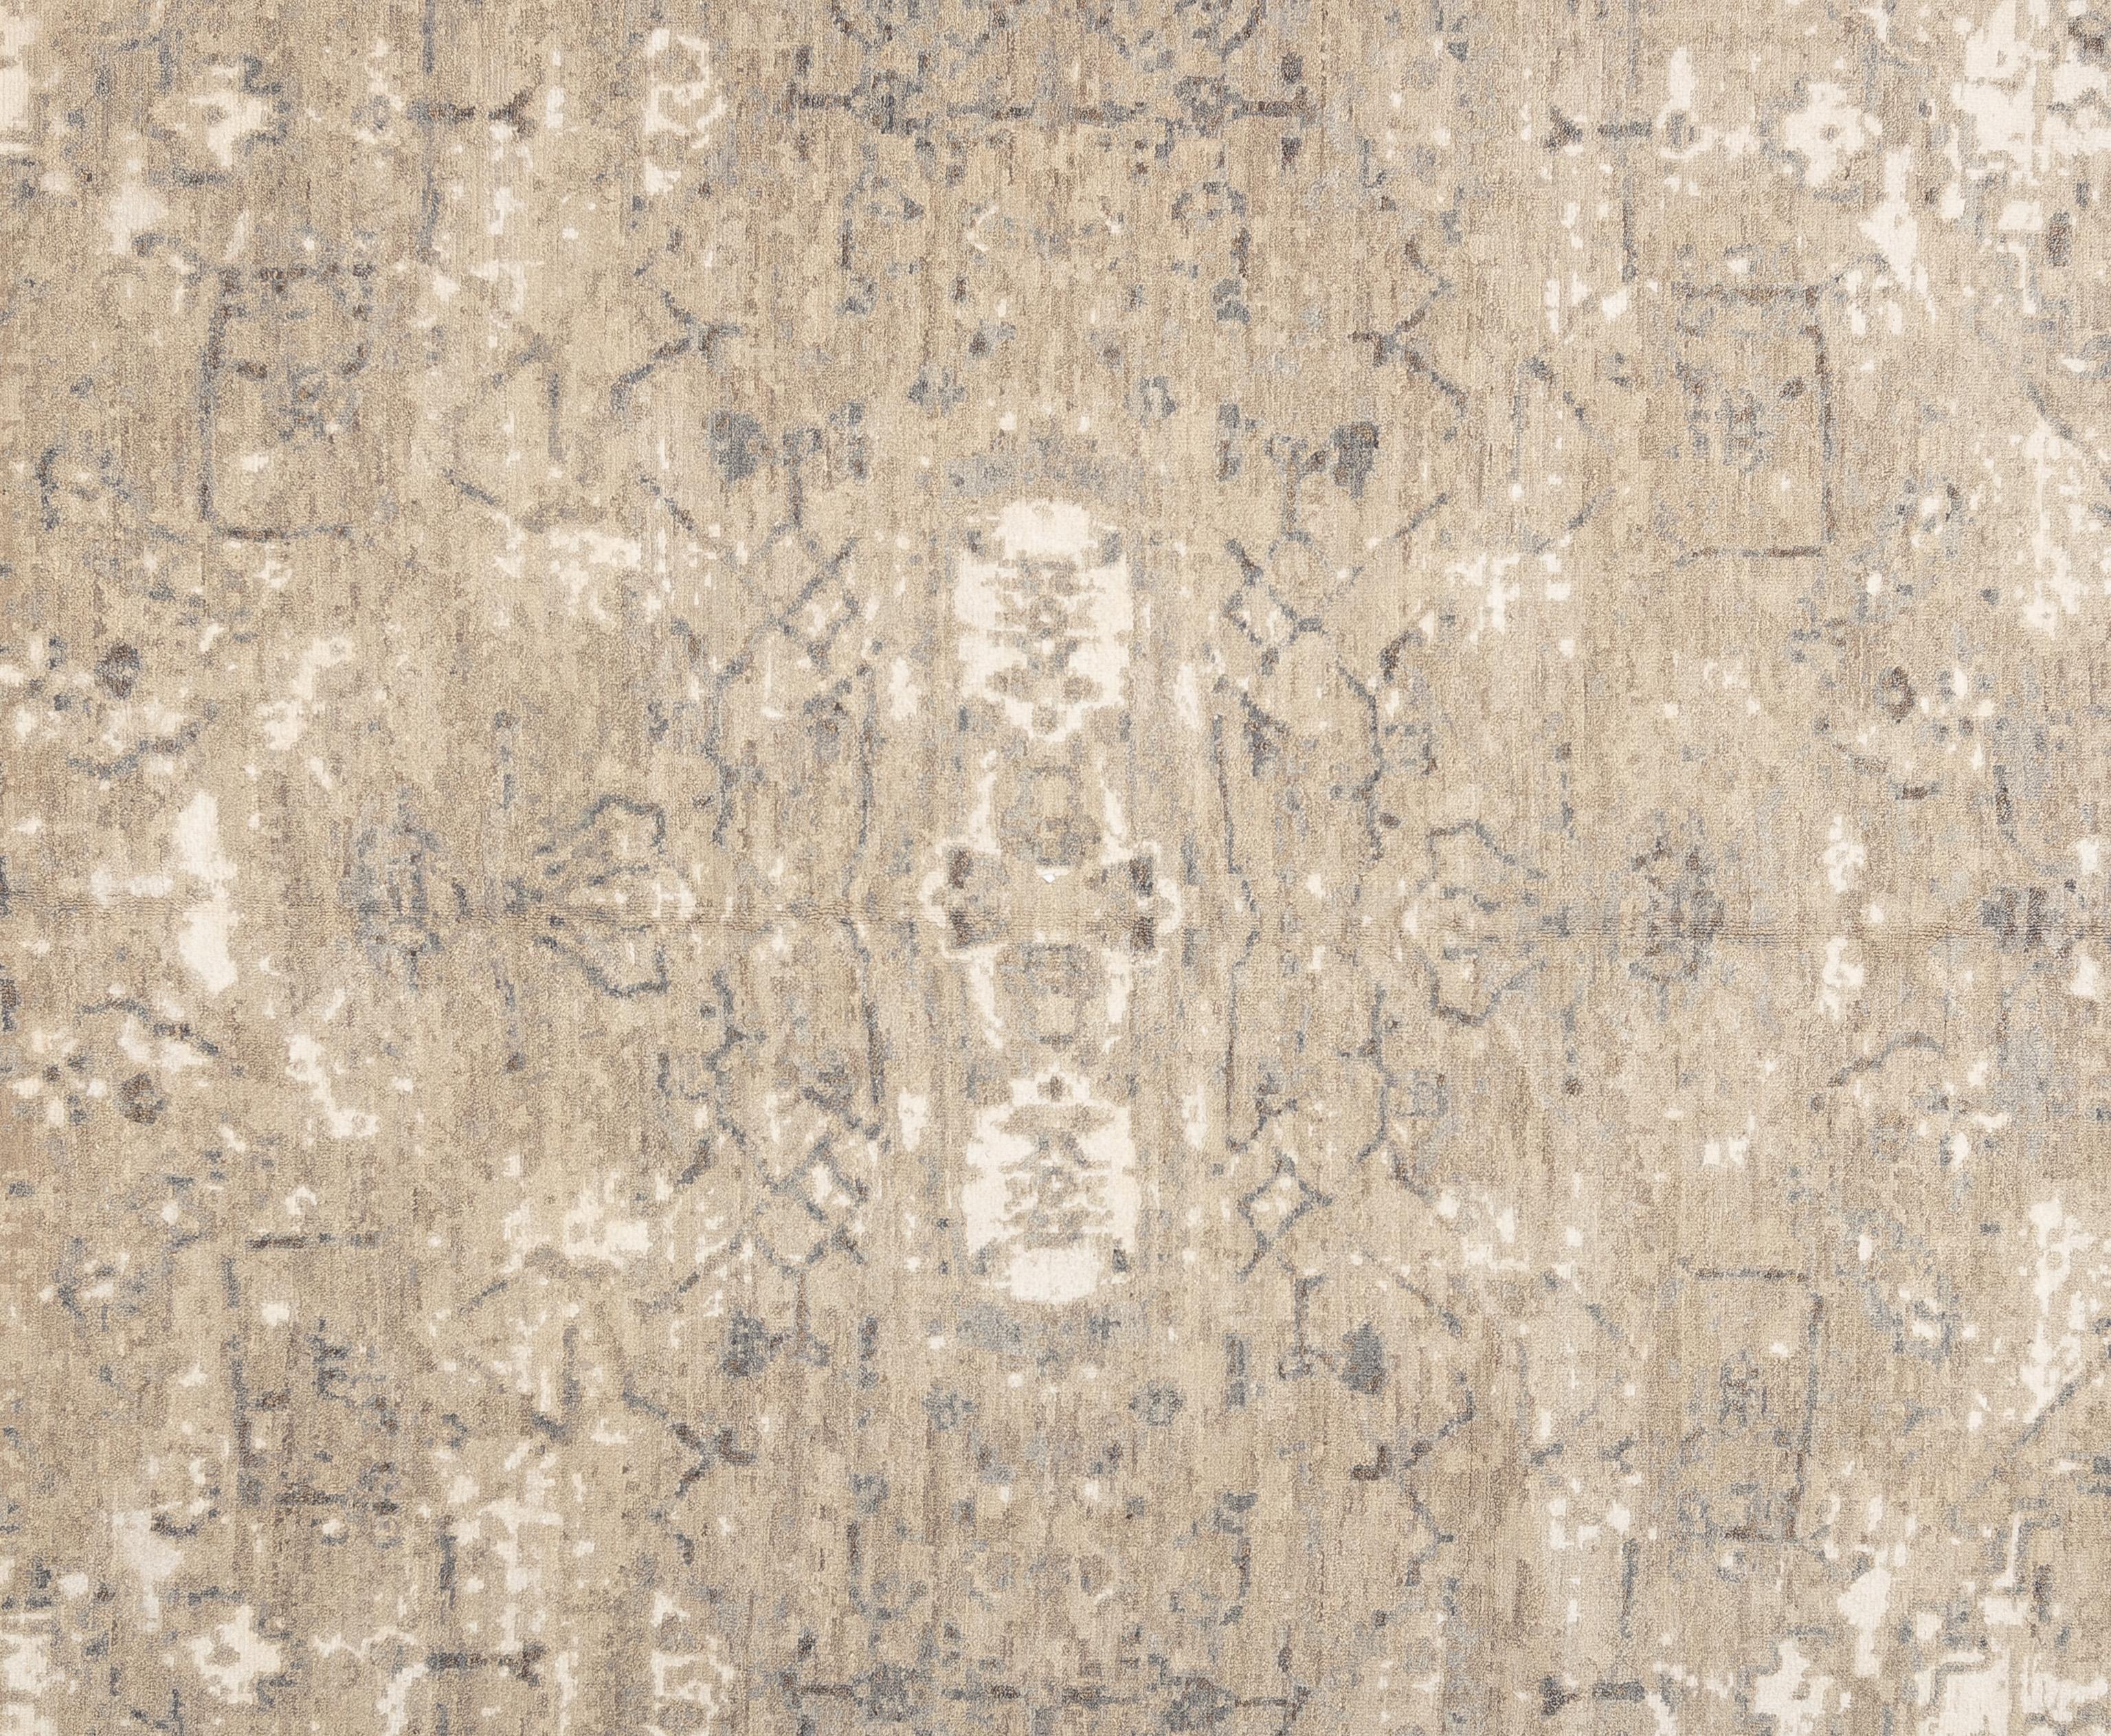 An all-over organic pattern of greige with lavender, taupe, and ivory on a warm beige field.
Handwoven in India using the finest handspun wool.

Size - 12' x 15'
Color - Subtle grays, taupes, beige and ivory accents
Type - Oushak

**Certified and